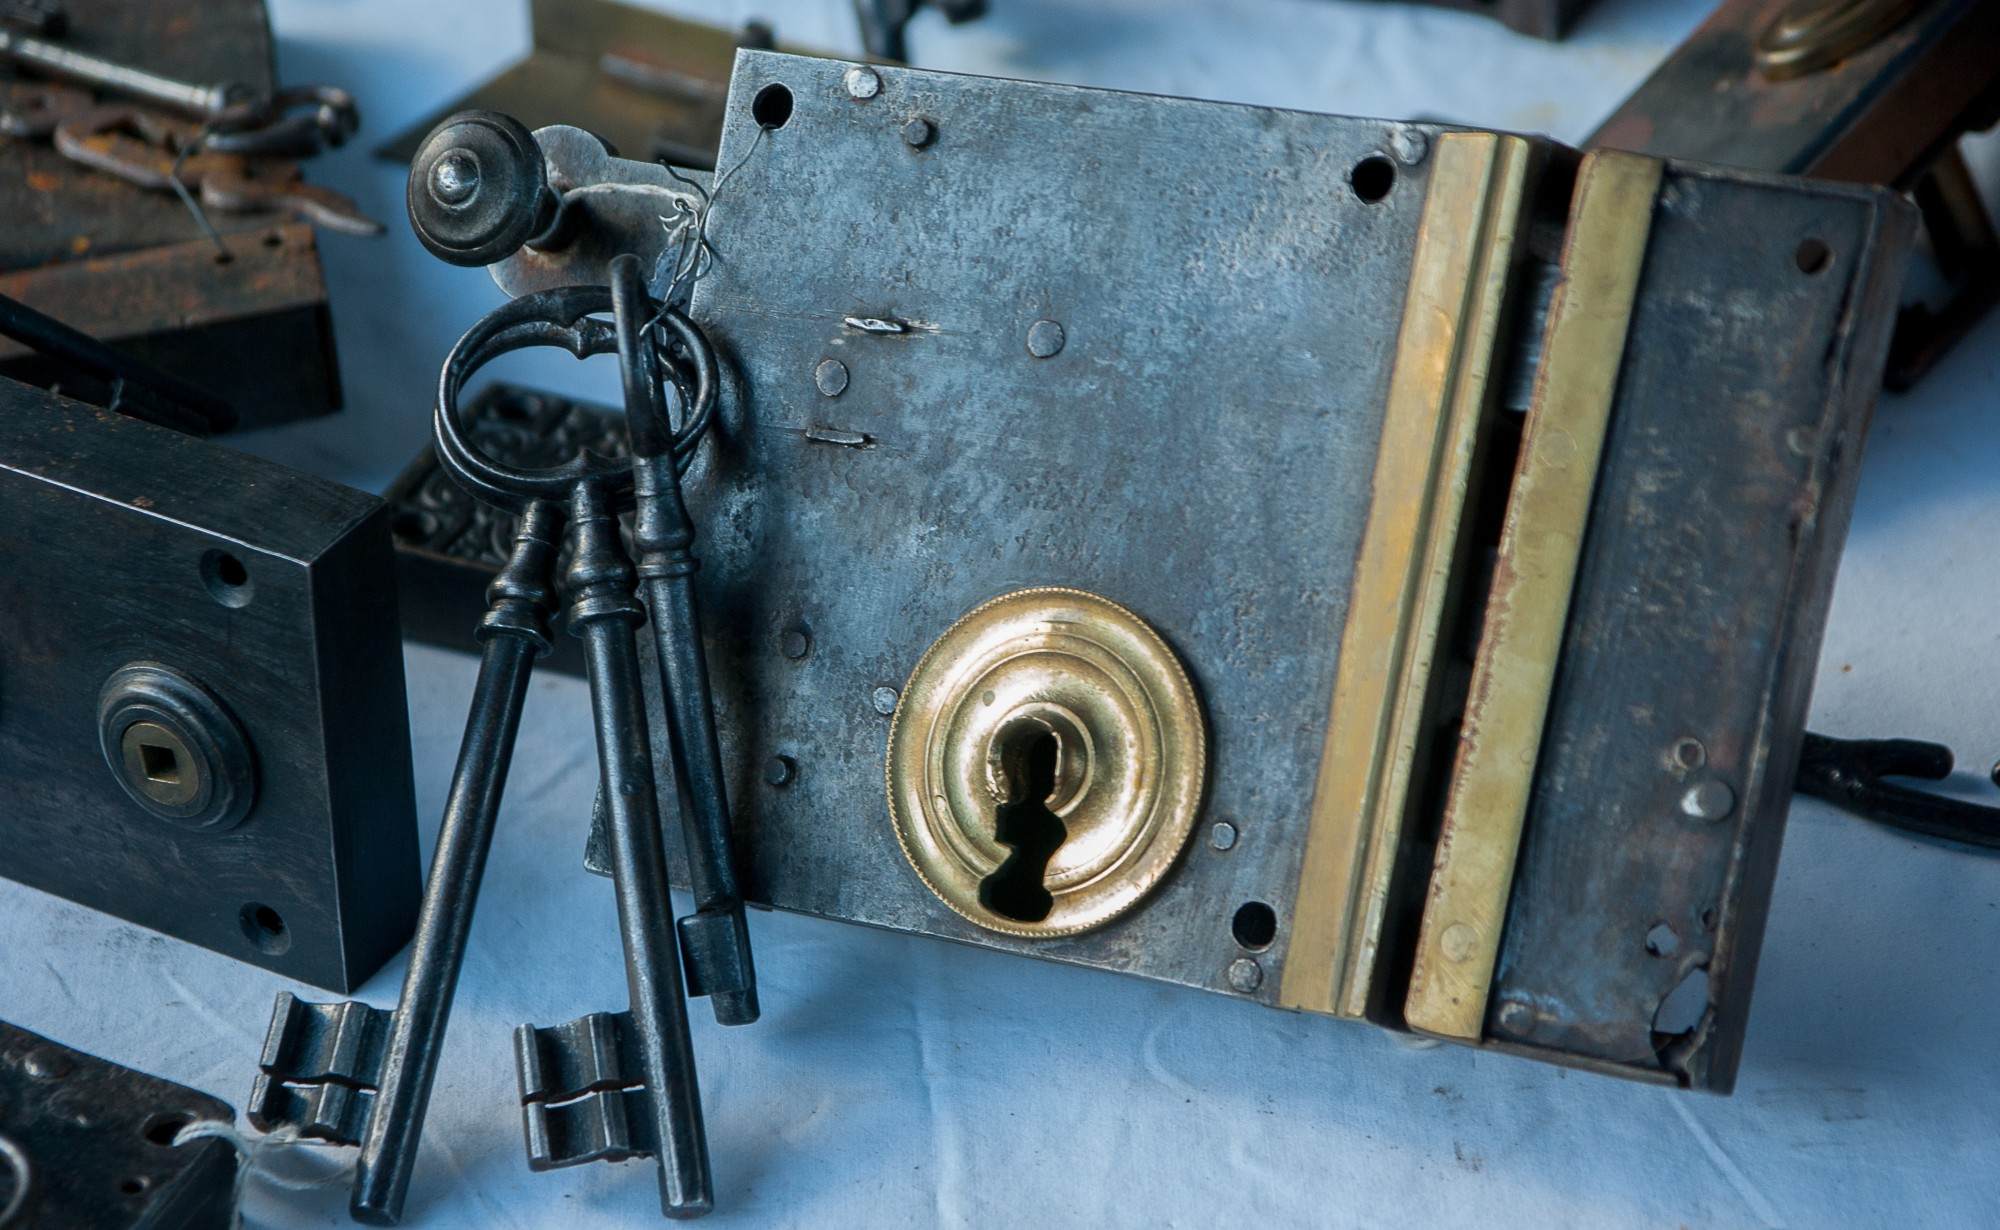 5 Common Situations That Call for a Professional Locksmith